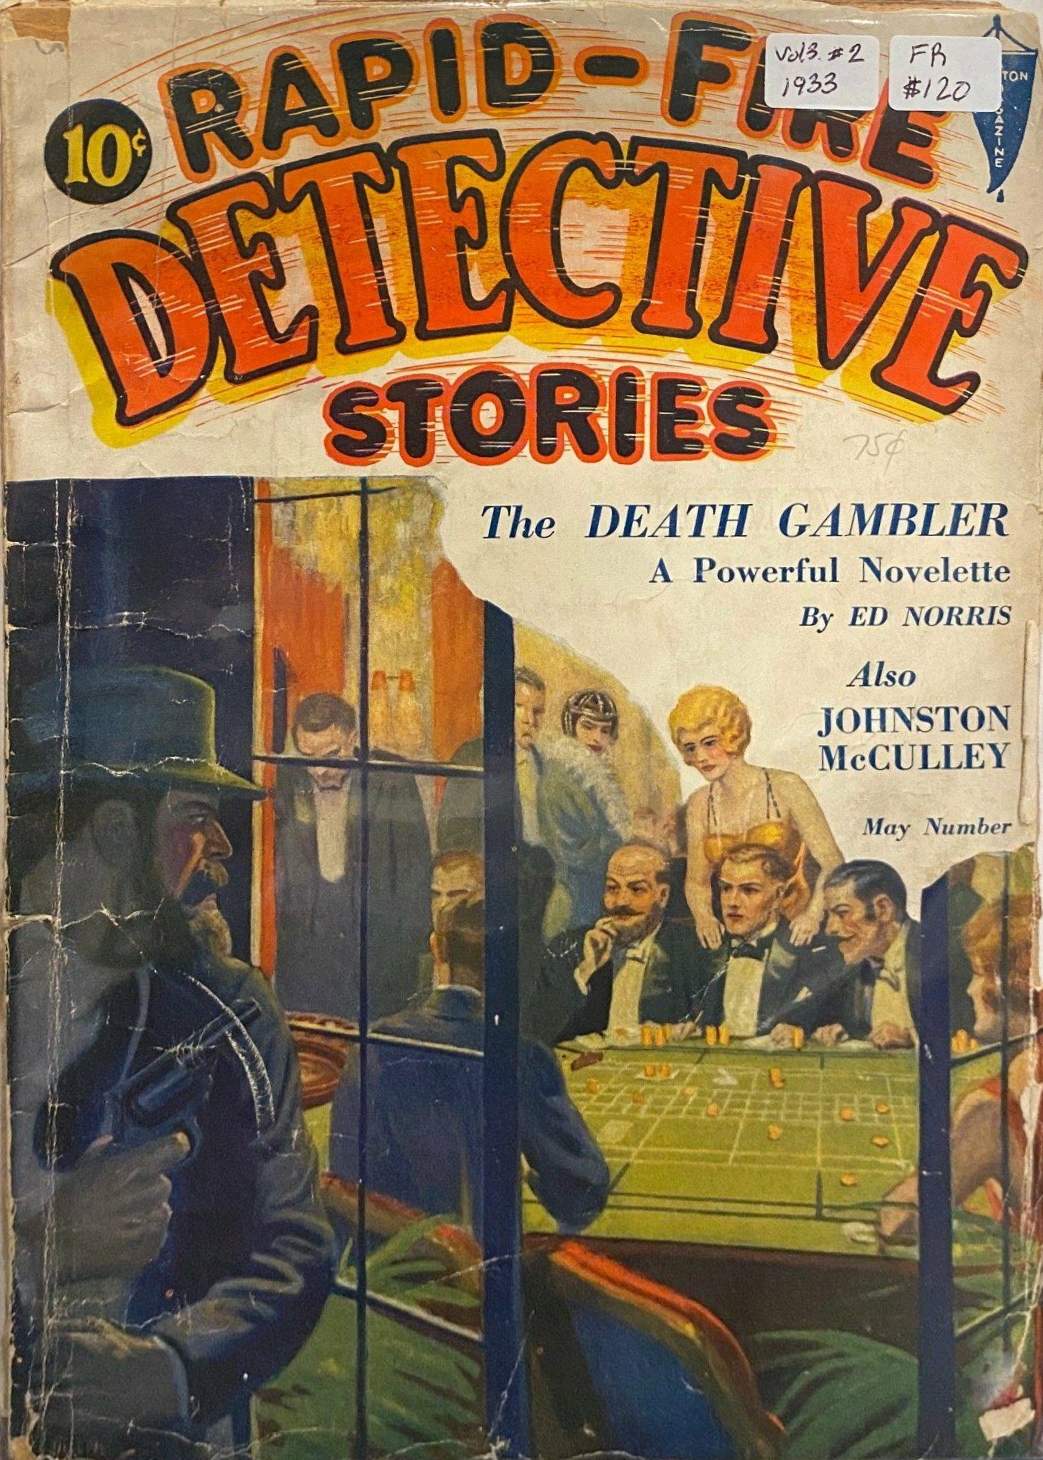 Rapid-Fire Detective Stories - May 1933